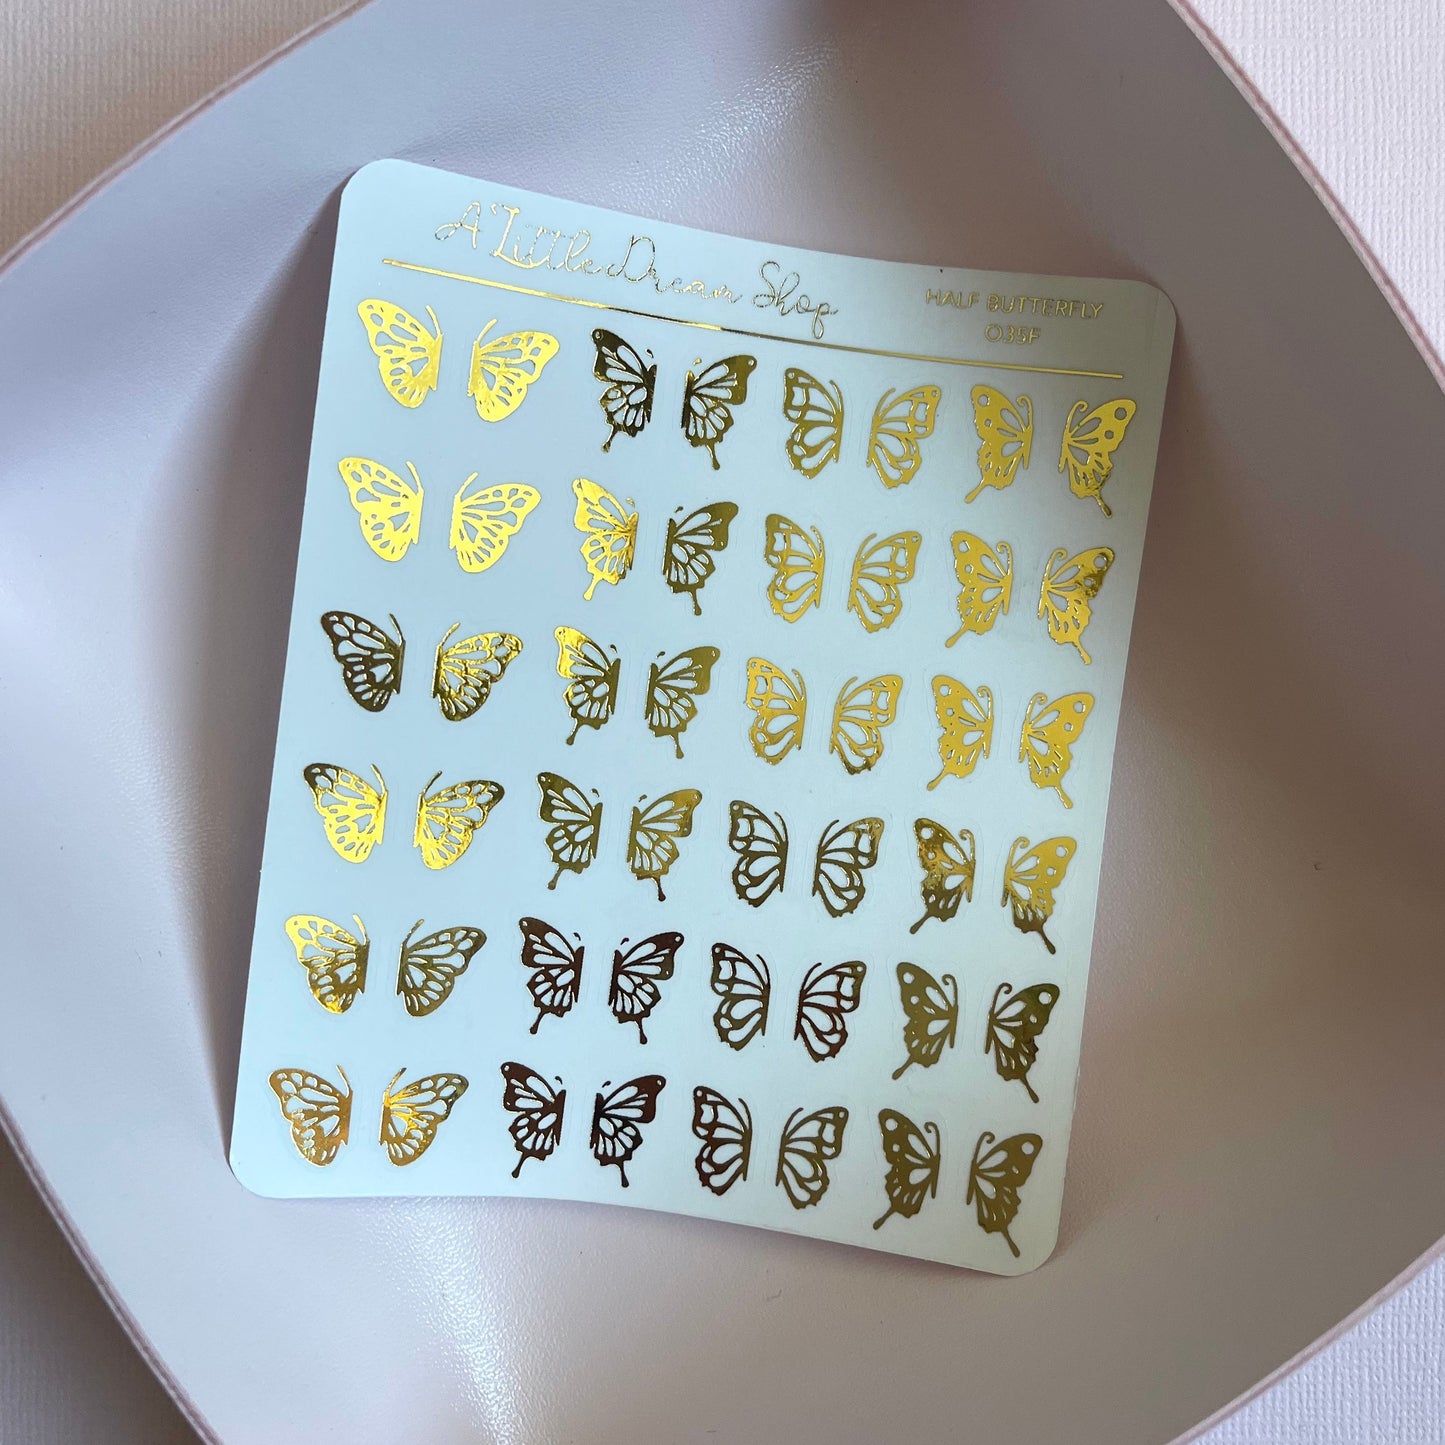 Half Butterfly - Foiled Stickers Sheet